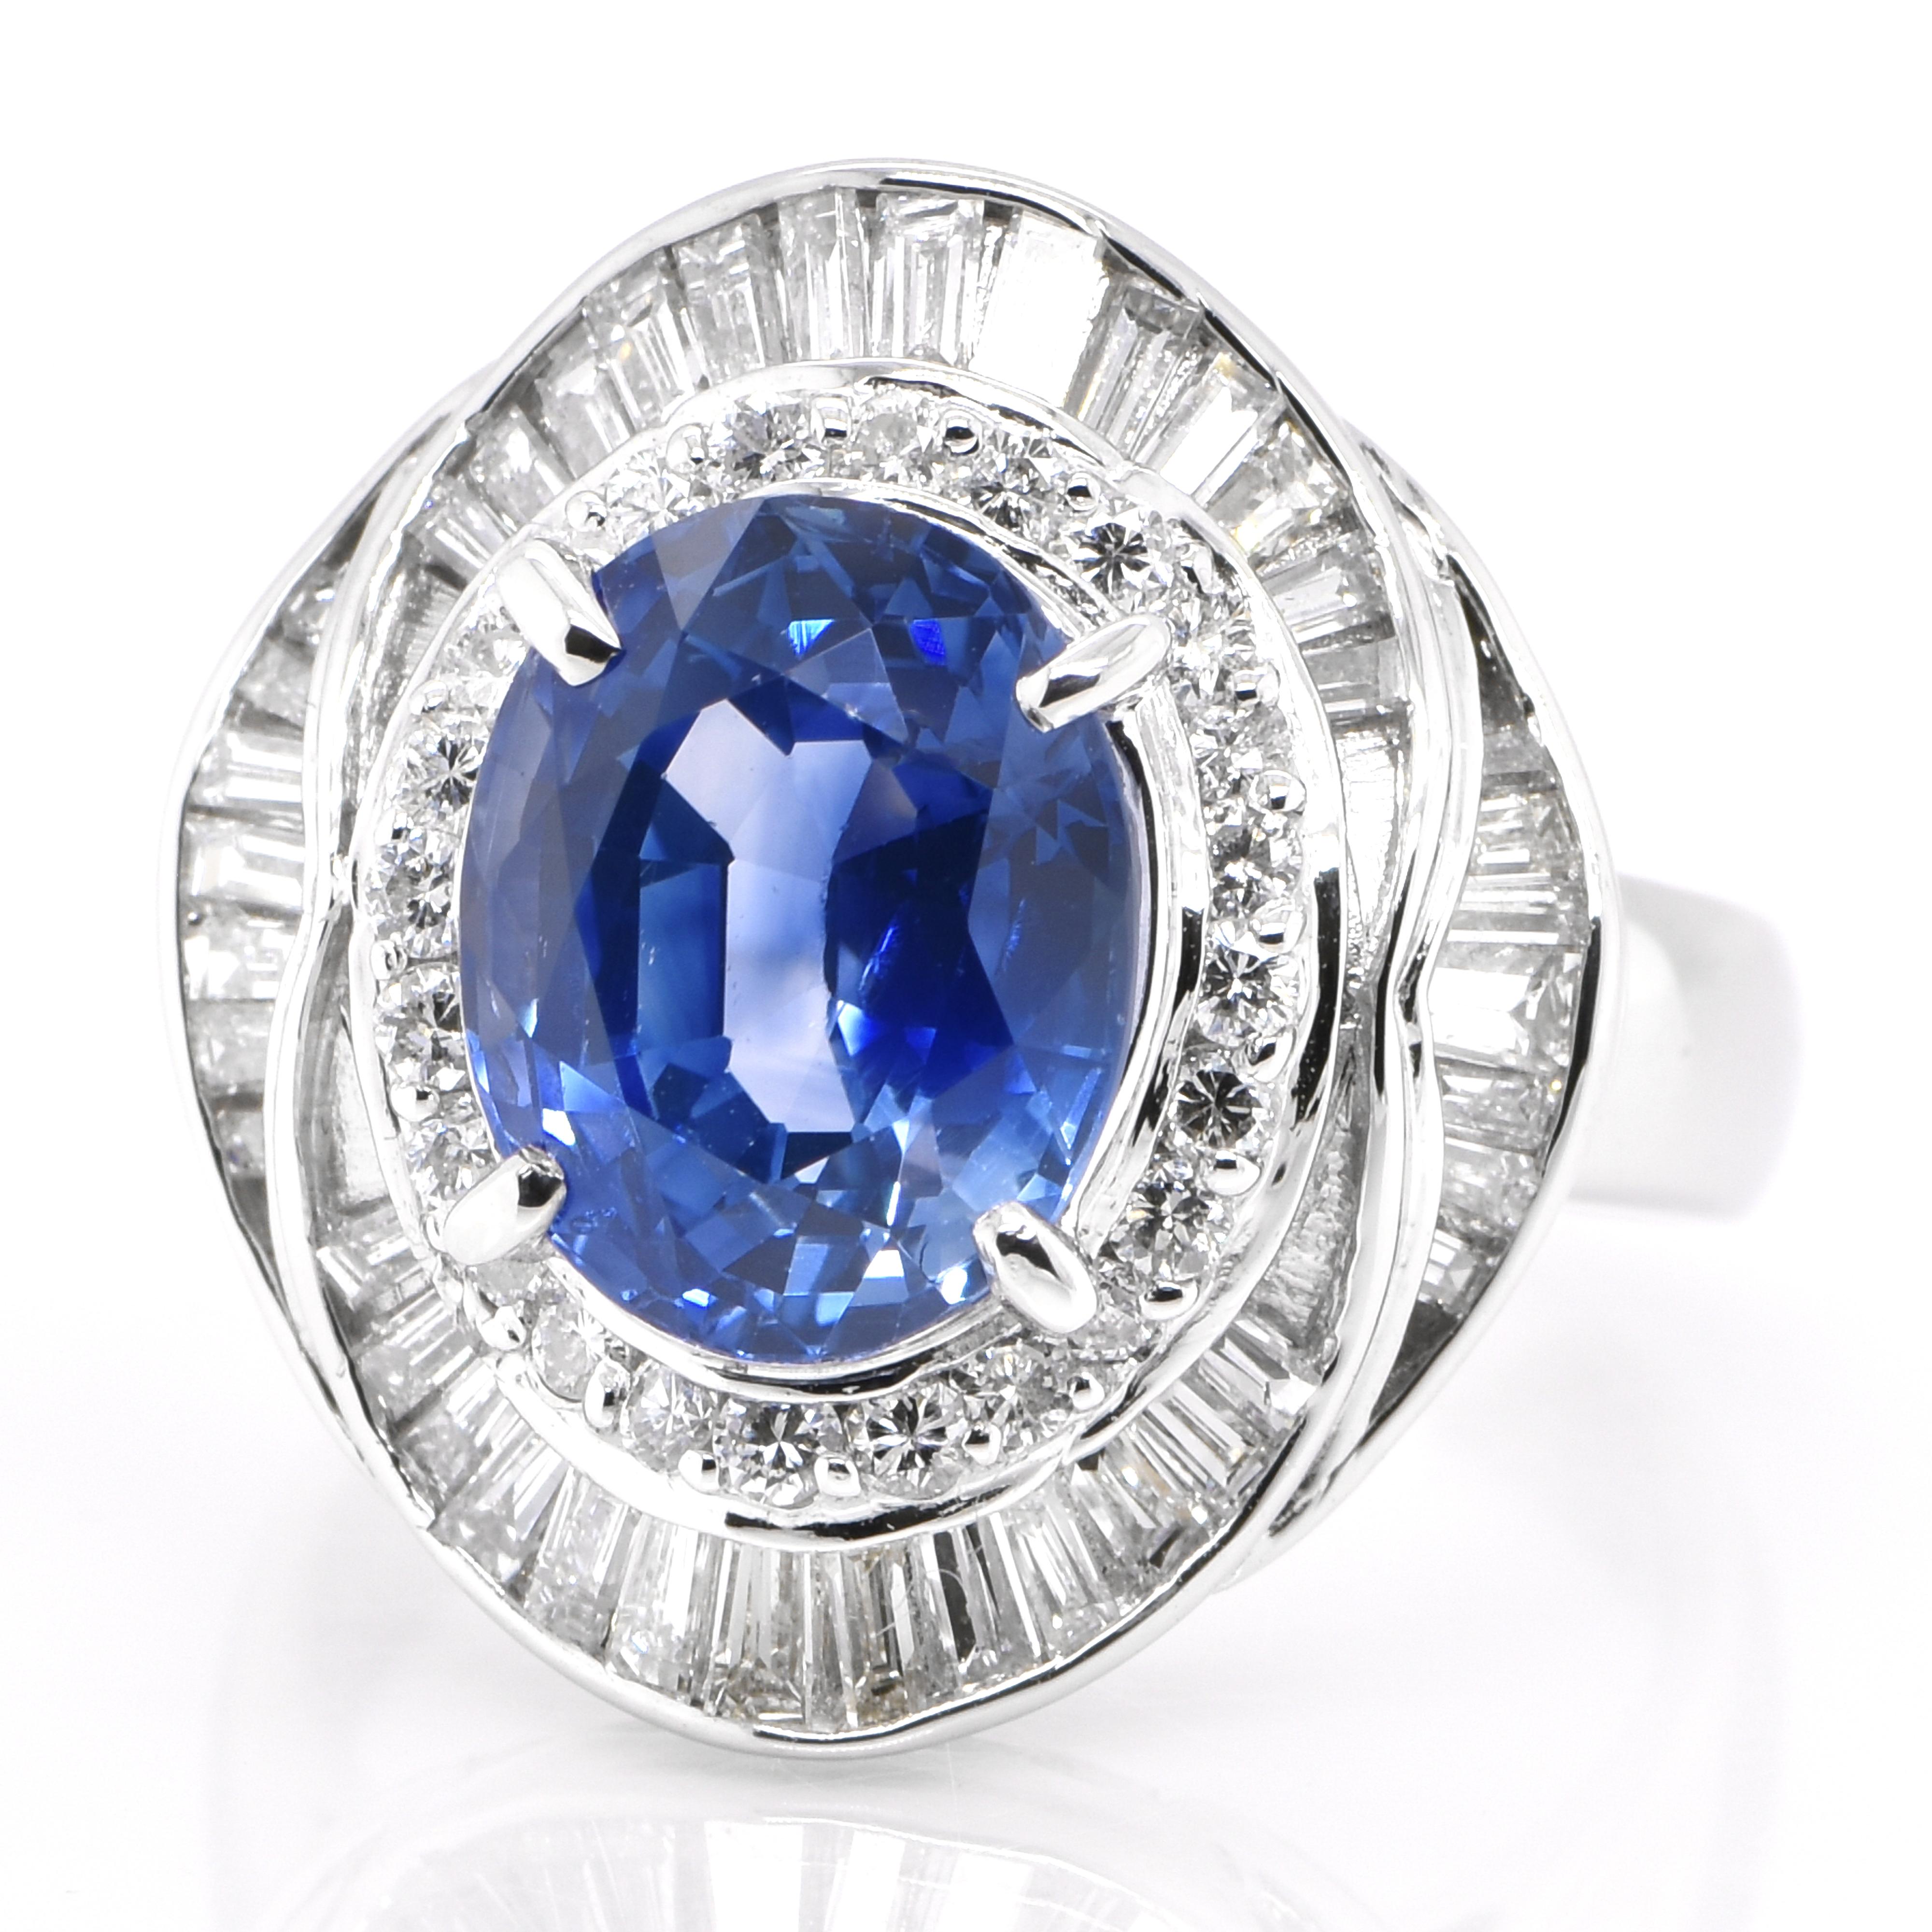 A beautiful ring featuring 5.09 Carat Natural Blue Sapphire and 1.37 Carats Diamond Accents set in Platinum. Sapphires have extraordinary durability - they excel in hardness as well as toughness and durability making them very popular in jewelry.